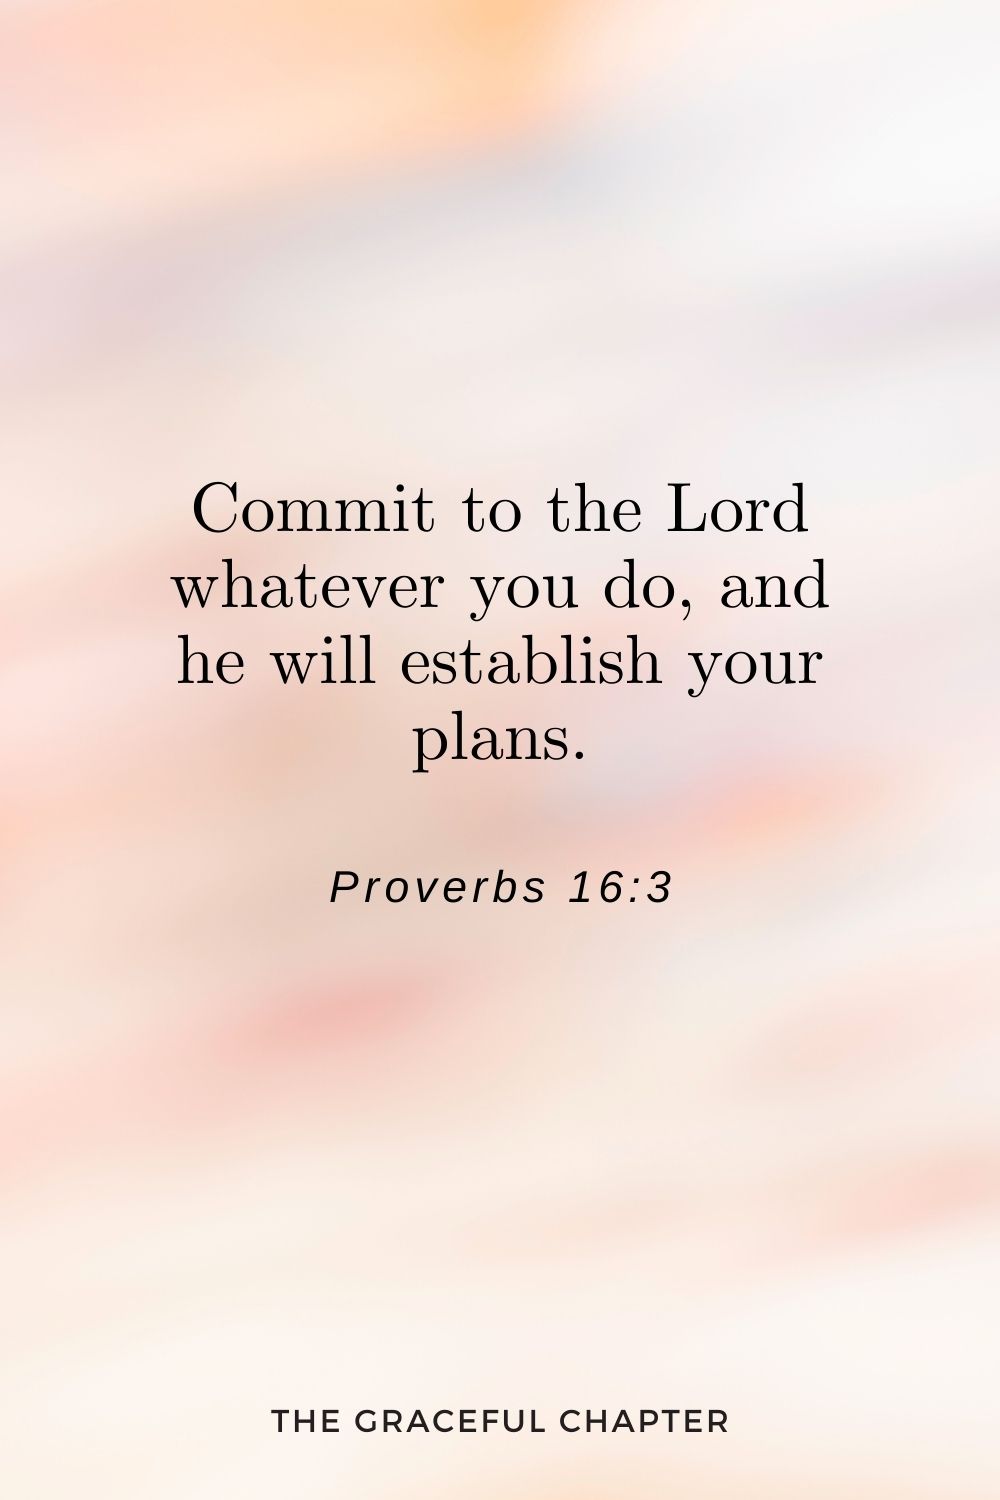 Commit to the Lord whatever you do, and he will establish your plans. Proverbs 16:3